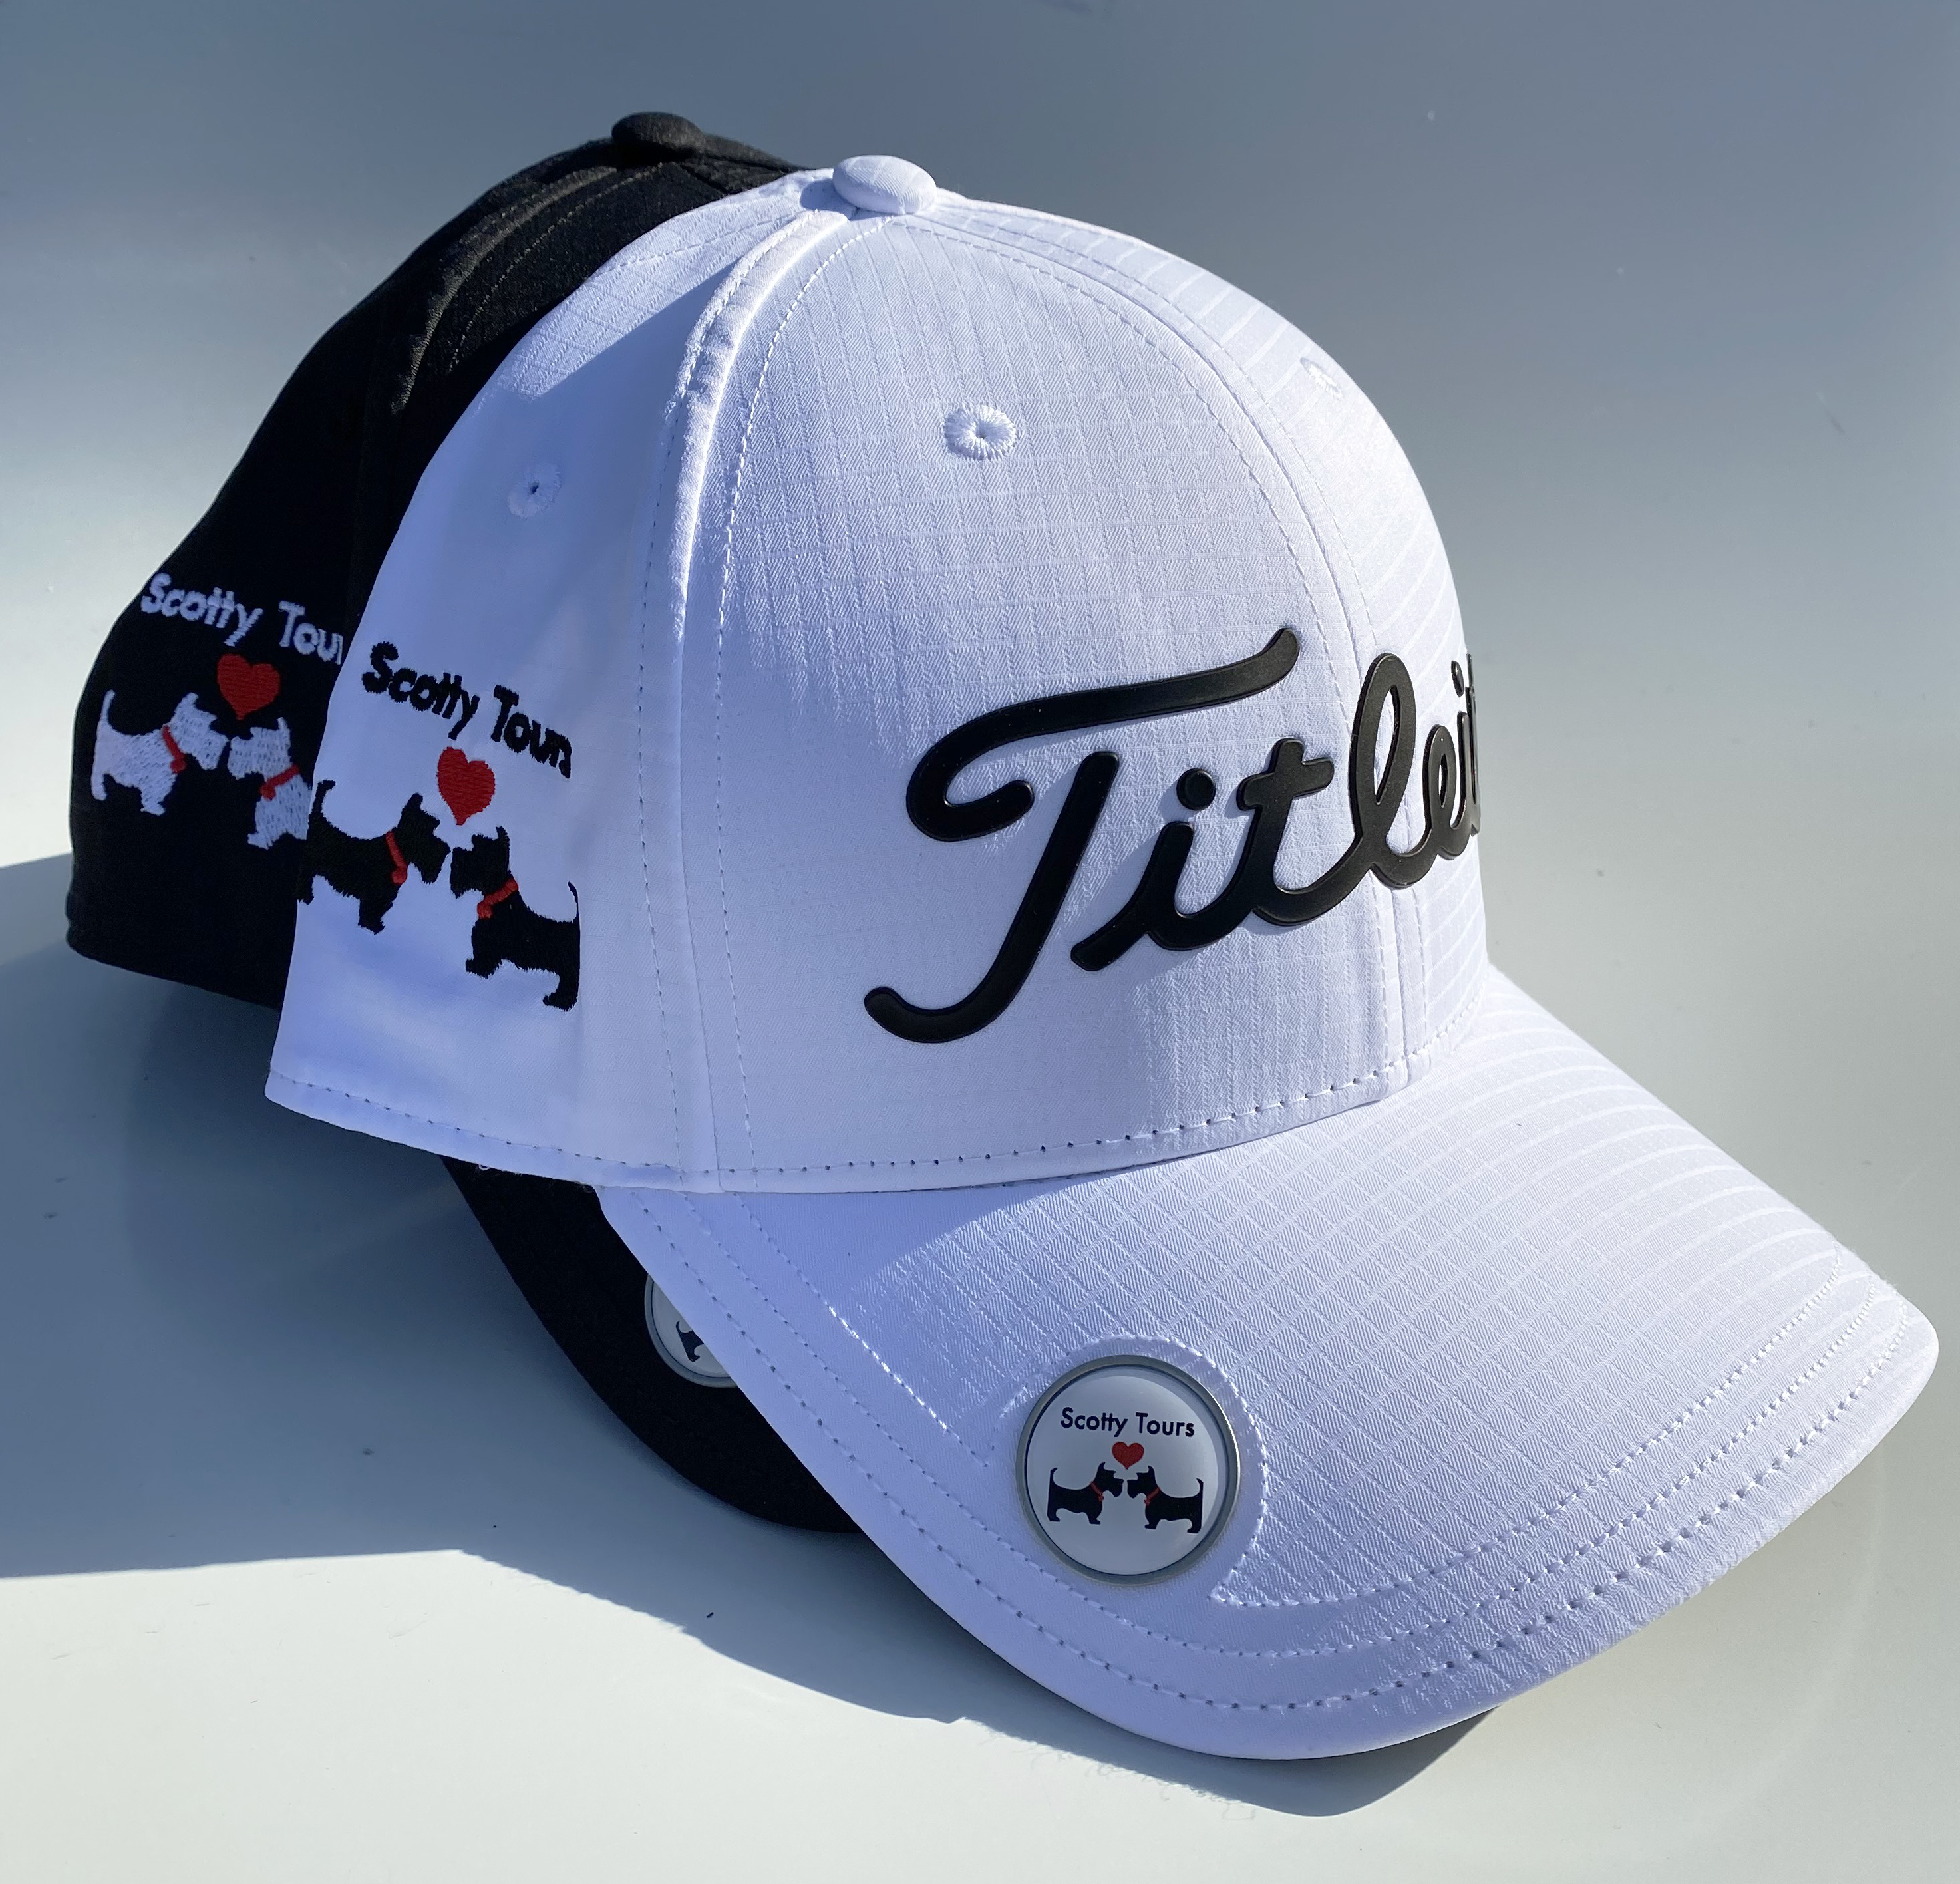 Titleist golf cap with embroidered logo and ball marker